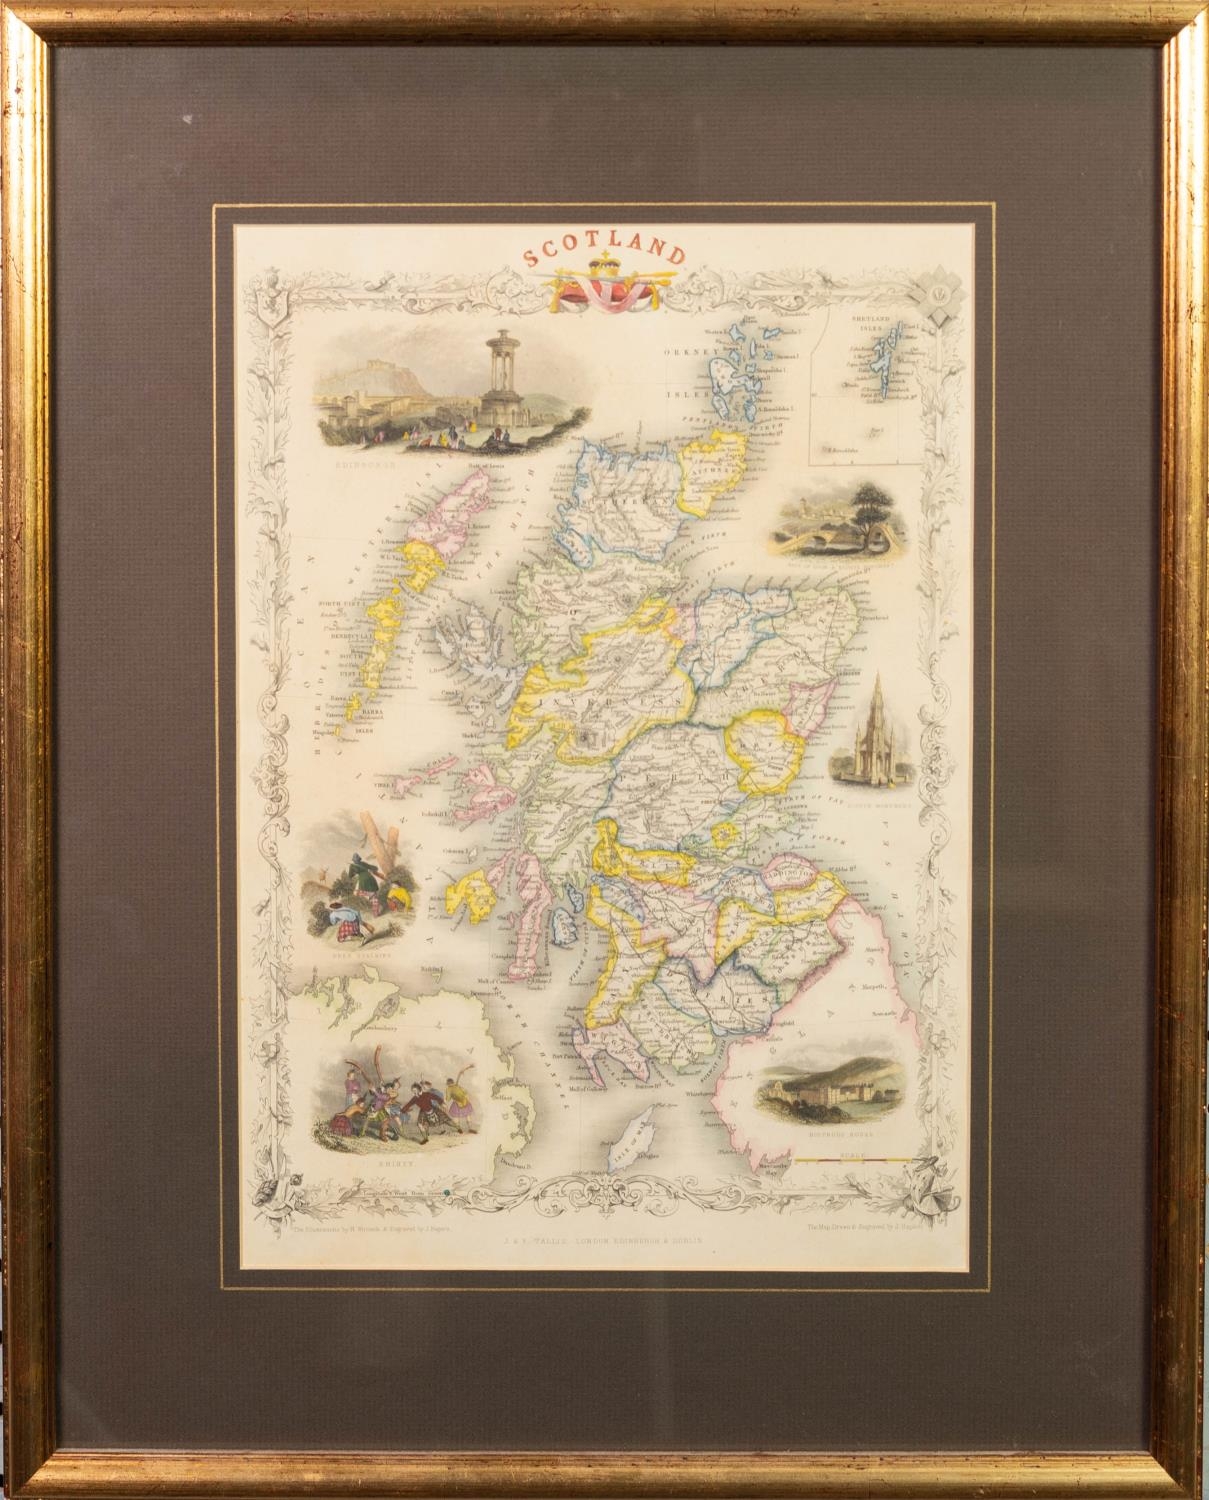 J. RAPKIN (19th Century) ENGRAVED AND HAND COLOURED MAP OF SCOTLAND, published by J & F Tallis, - Image 2 of 2